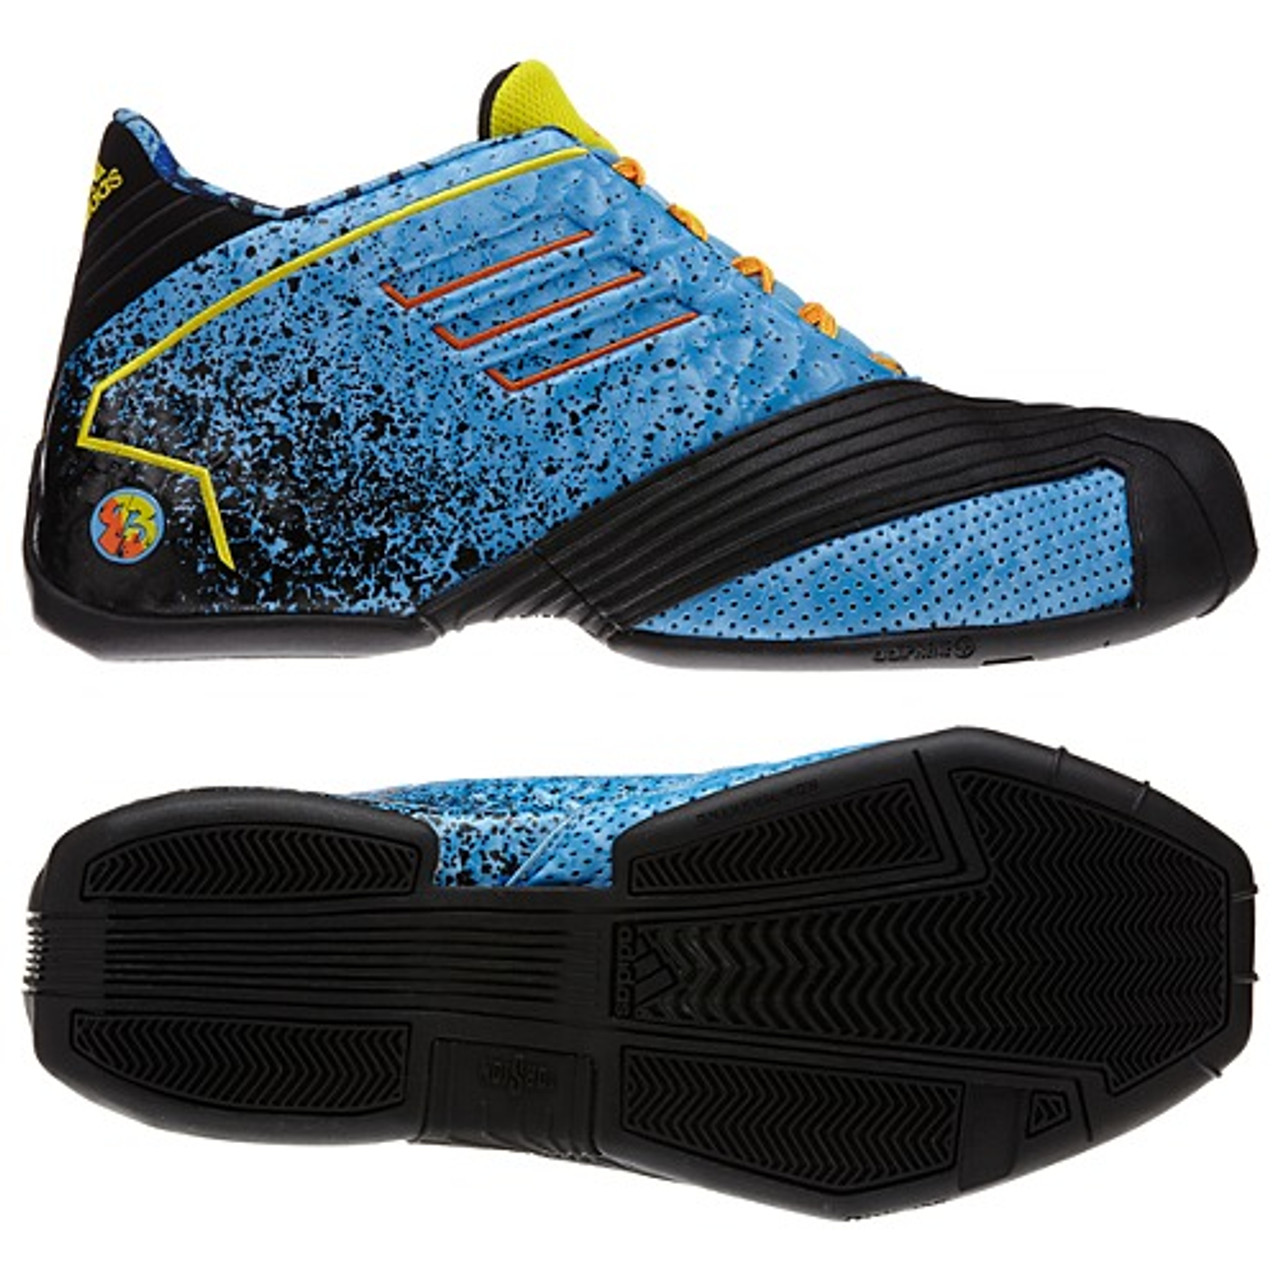 ADIDAS Tmac 1 Basketball Shoes For Men - Buy ADIDAS Tmac 1 Basketball Shoes  For Men Online at Best Price - Shop Online for Footwears in India